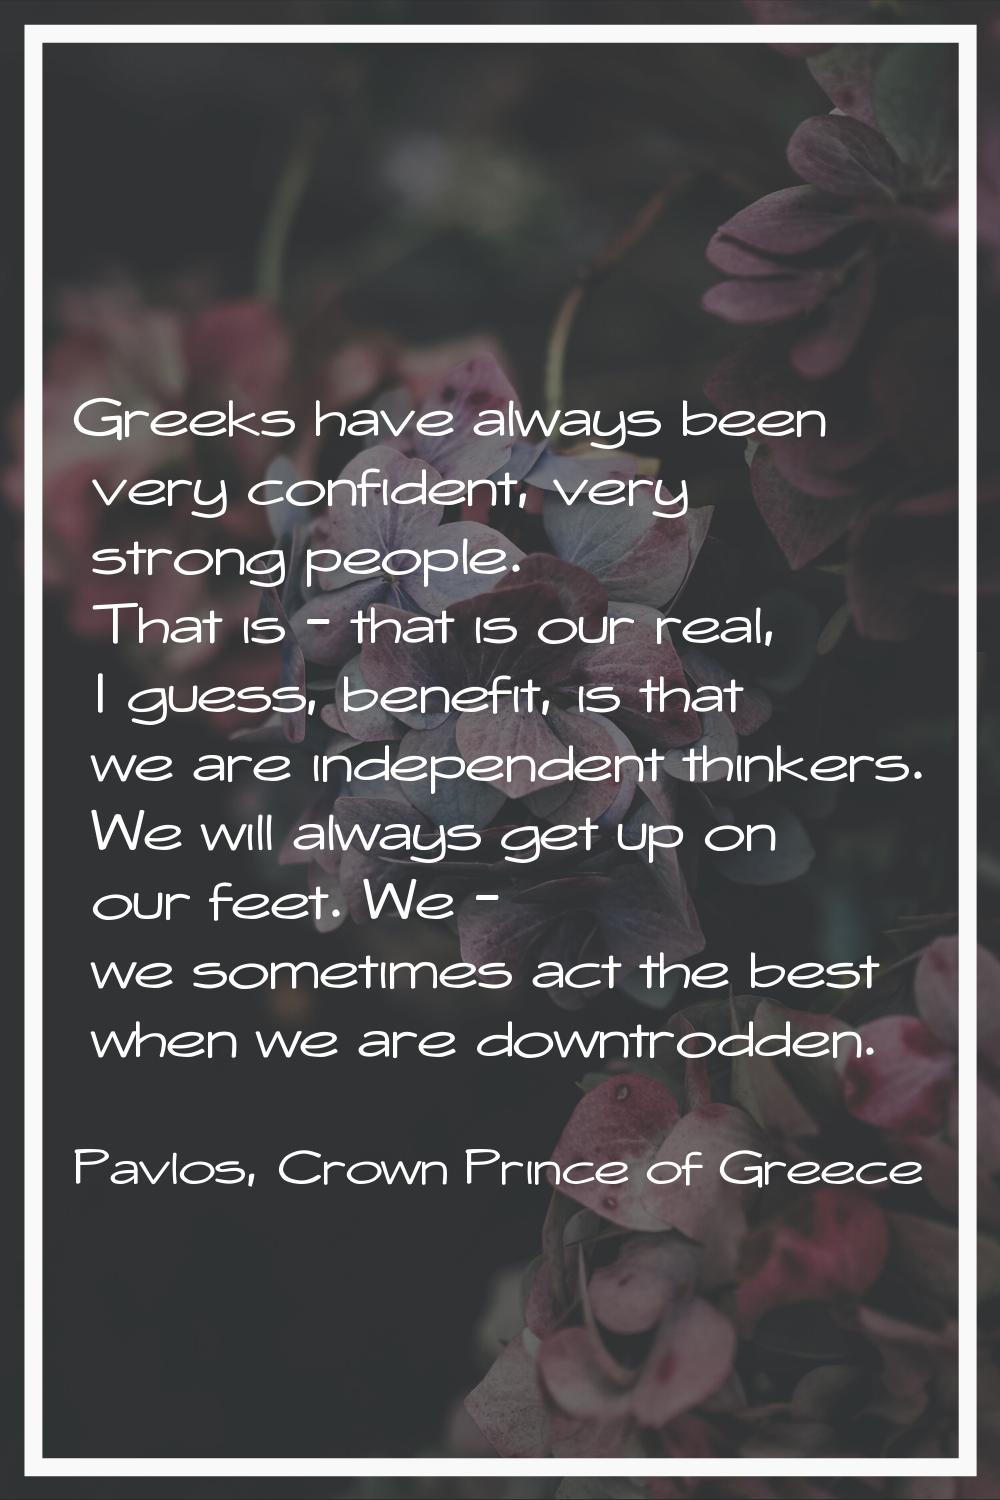 Greeks have always been very confident, very strong people. That is - that is our real, I guess, be